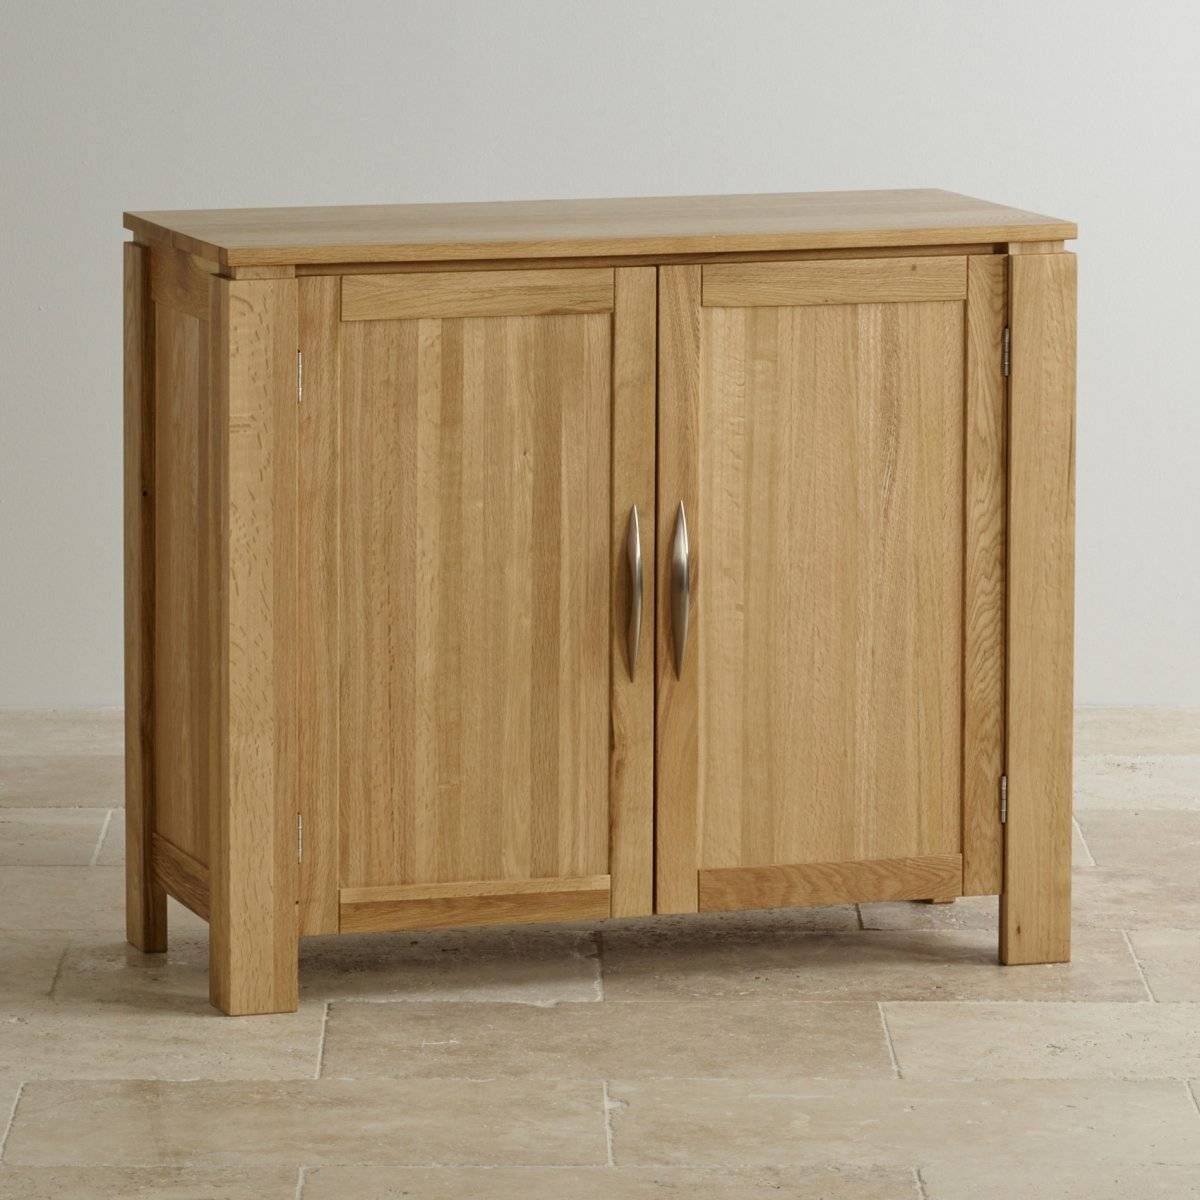 Galway Small Sideboard In Natural Solid Oak | Oak Furniture Land Within Small Wooden Sideboards (View 7 of 30)